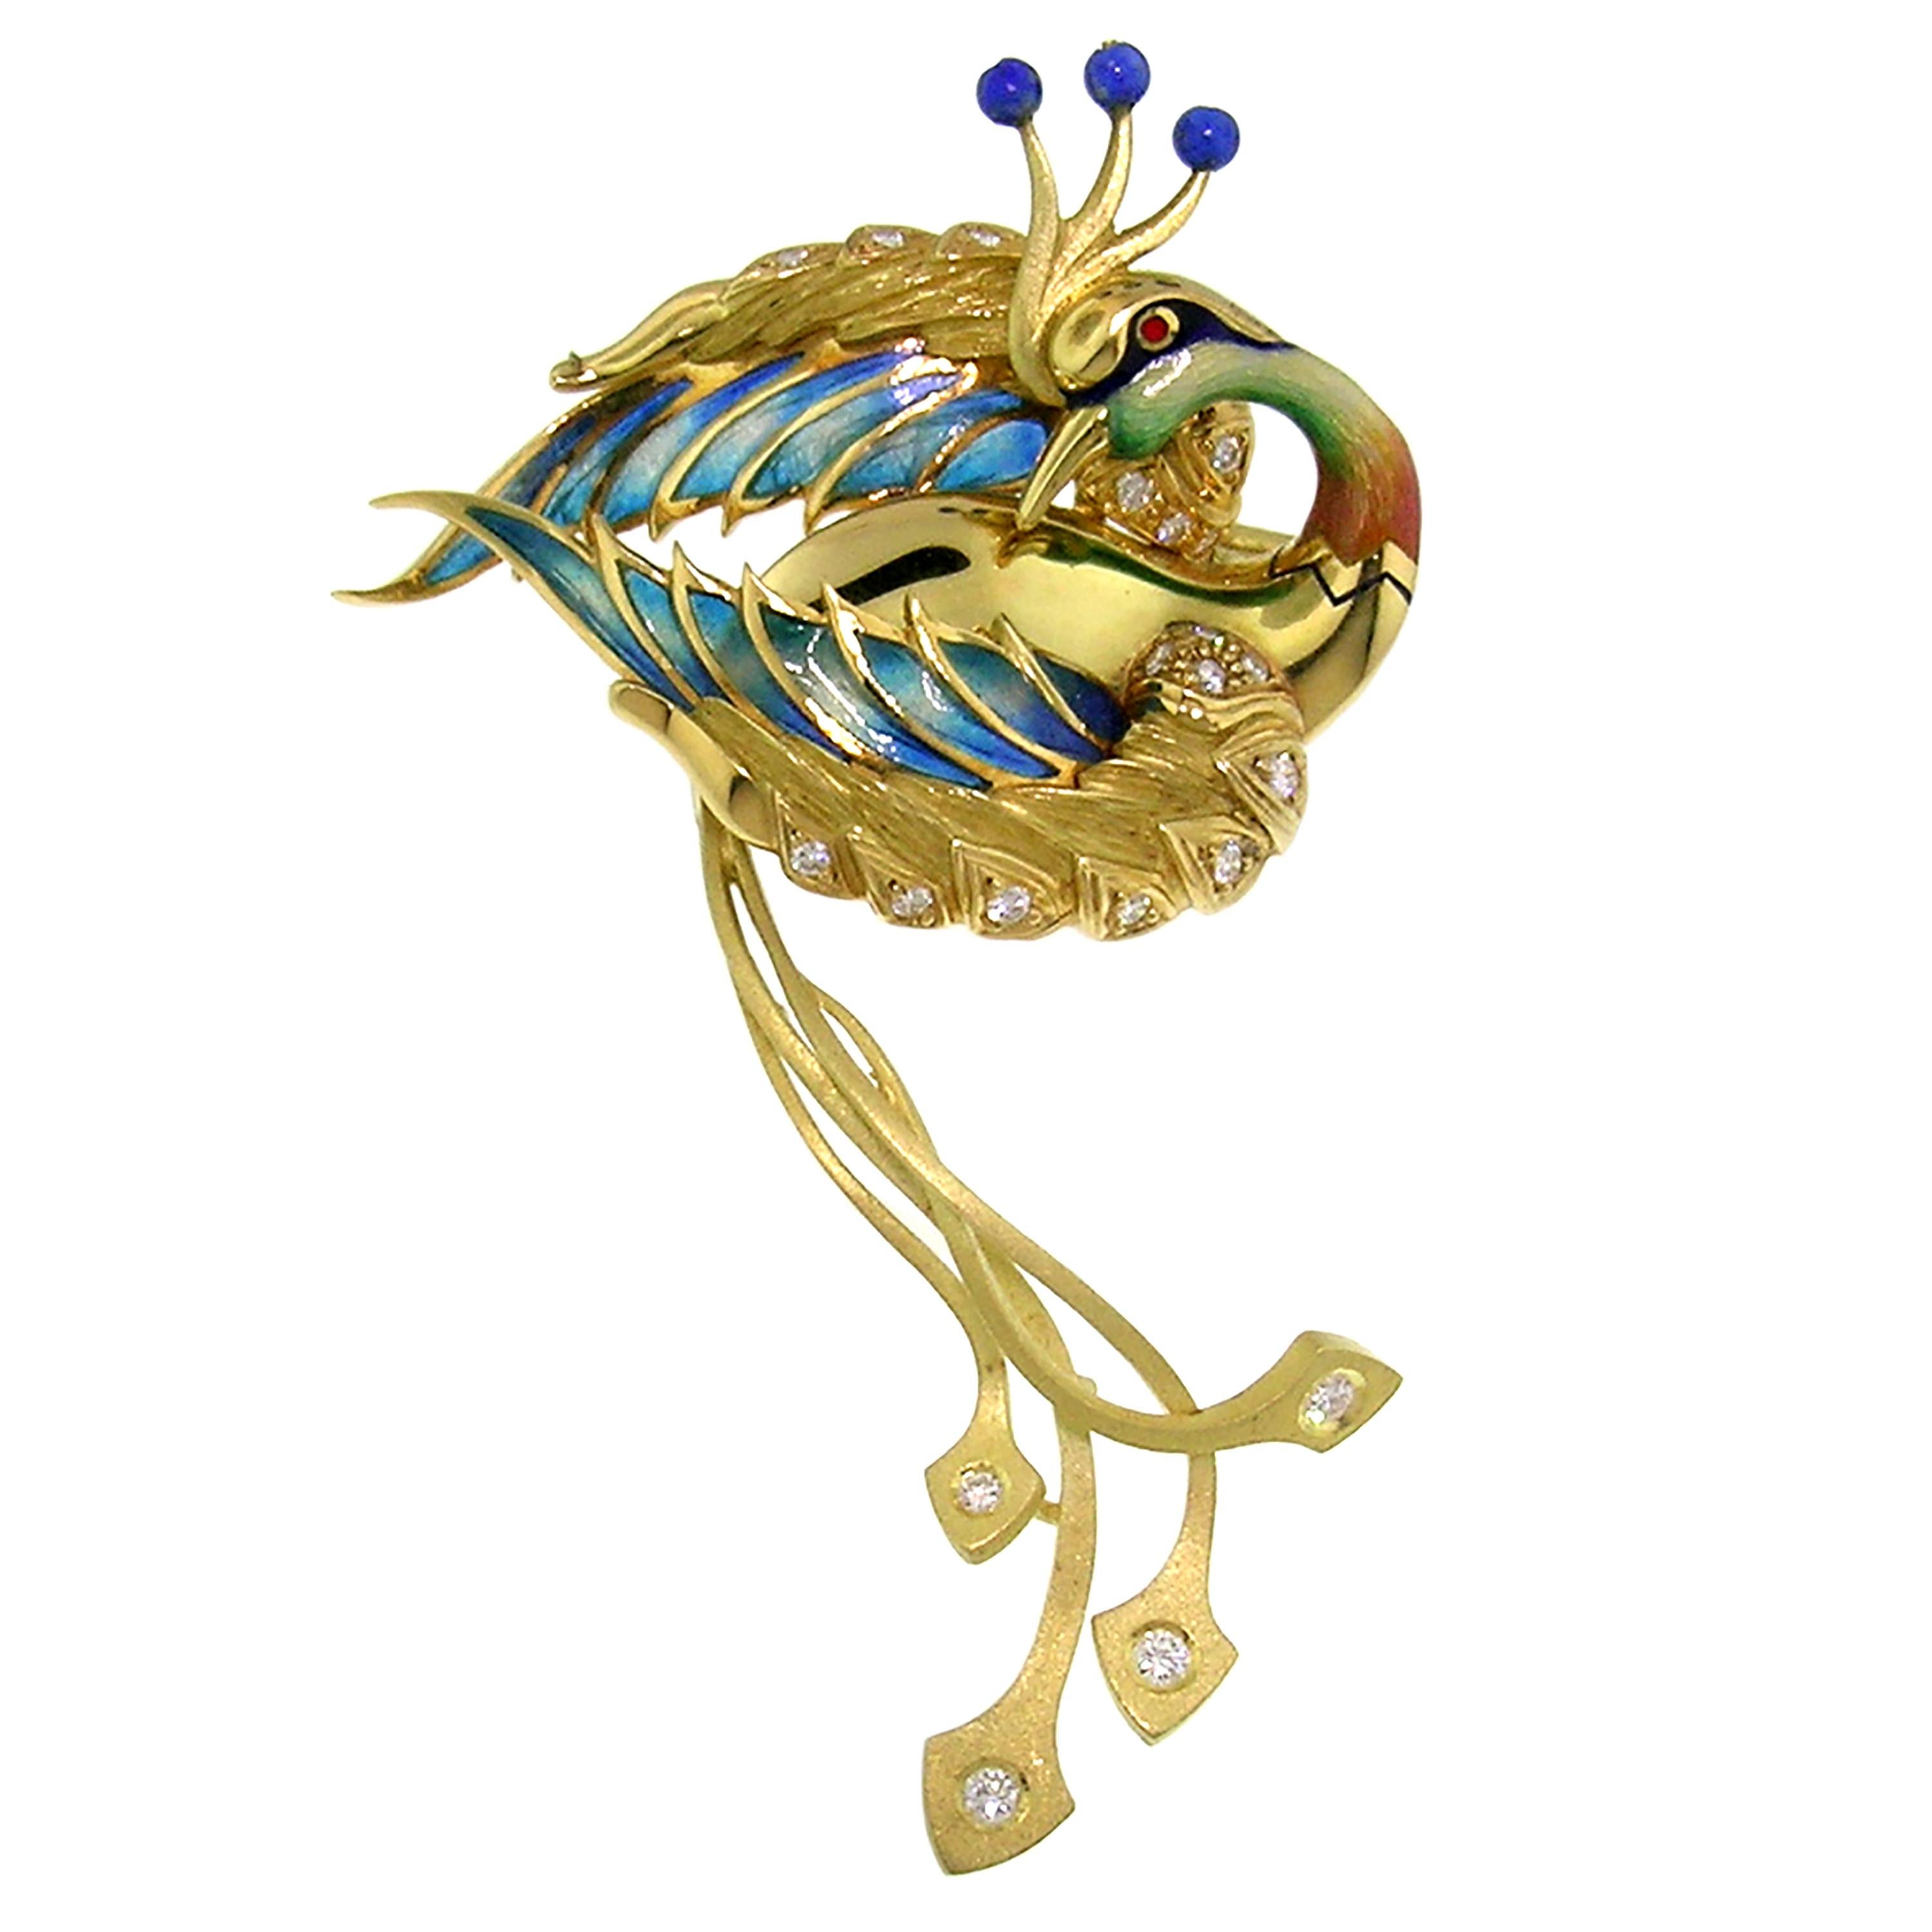 Antoni Farré “Bird of Paradise” 18kt and Plique a Jour Brooch, Handmade in Spain